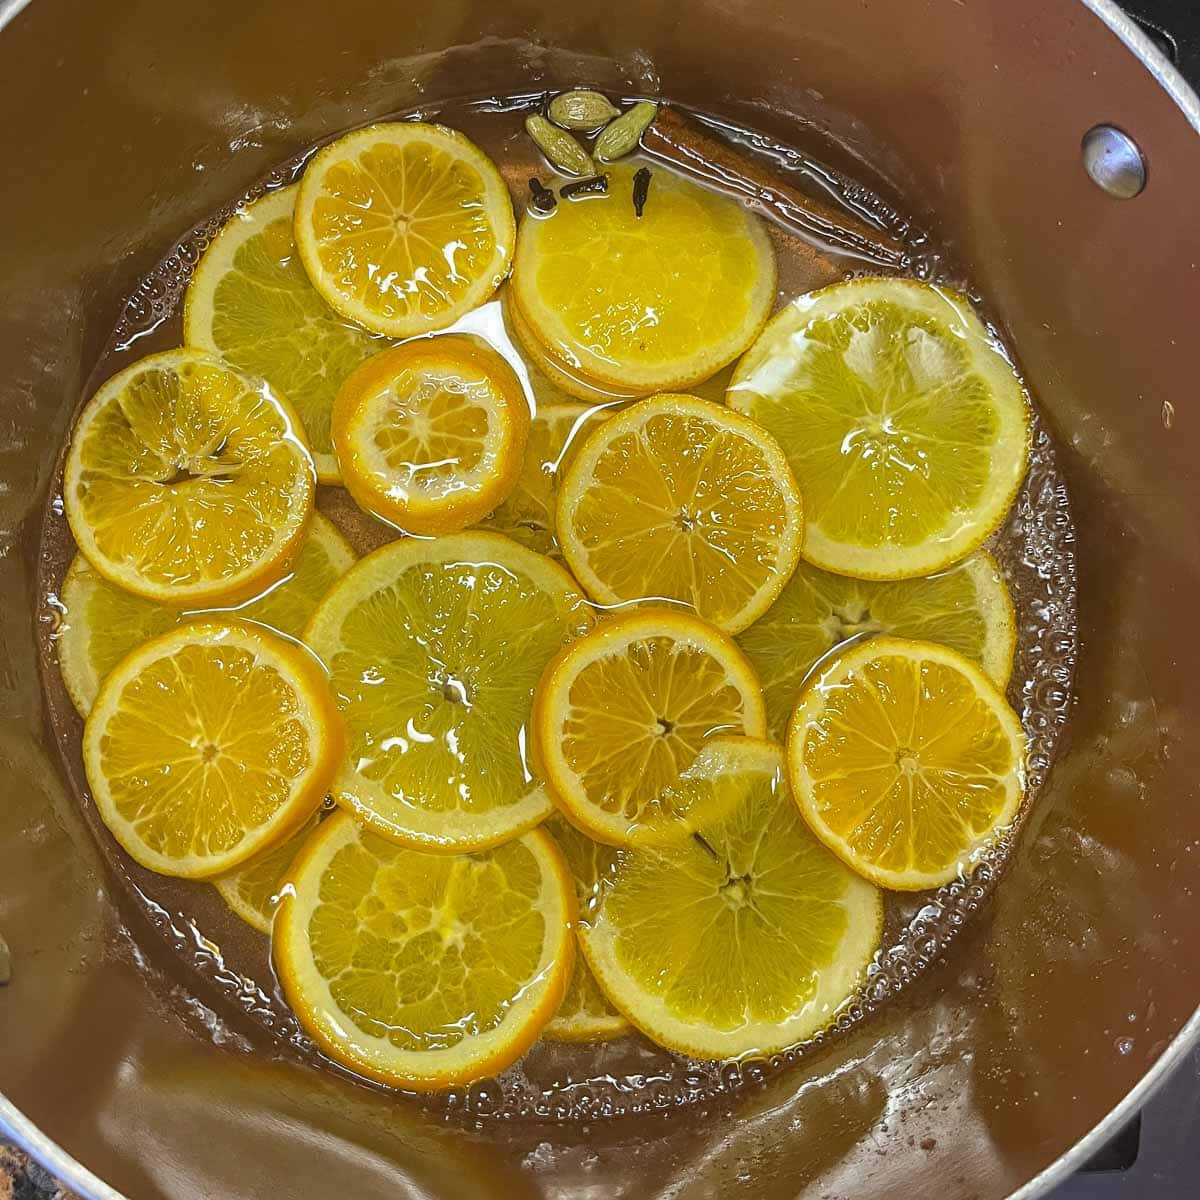 candied orange slices in syrup